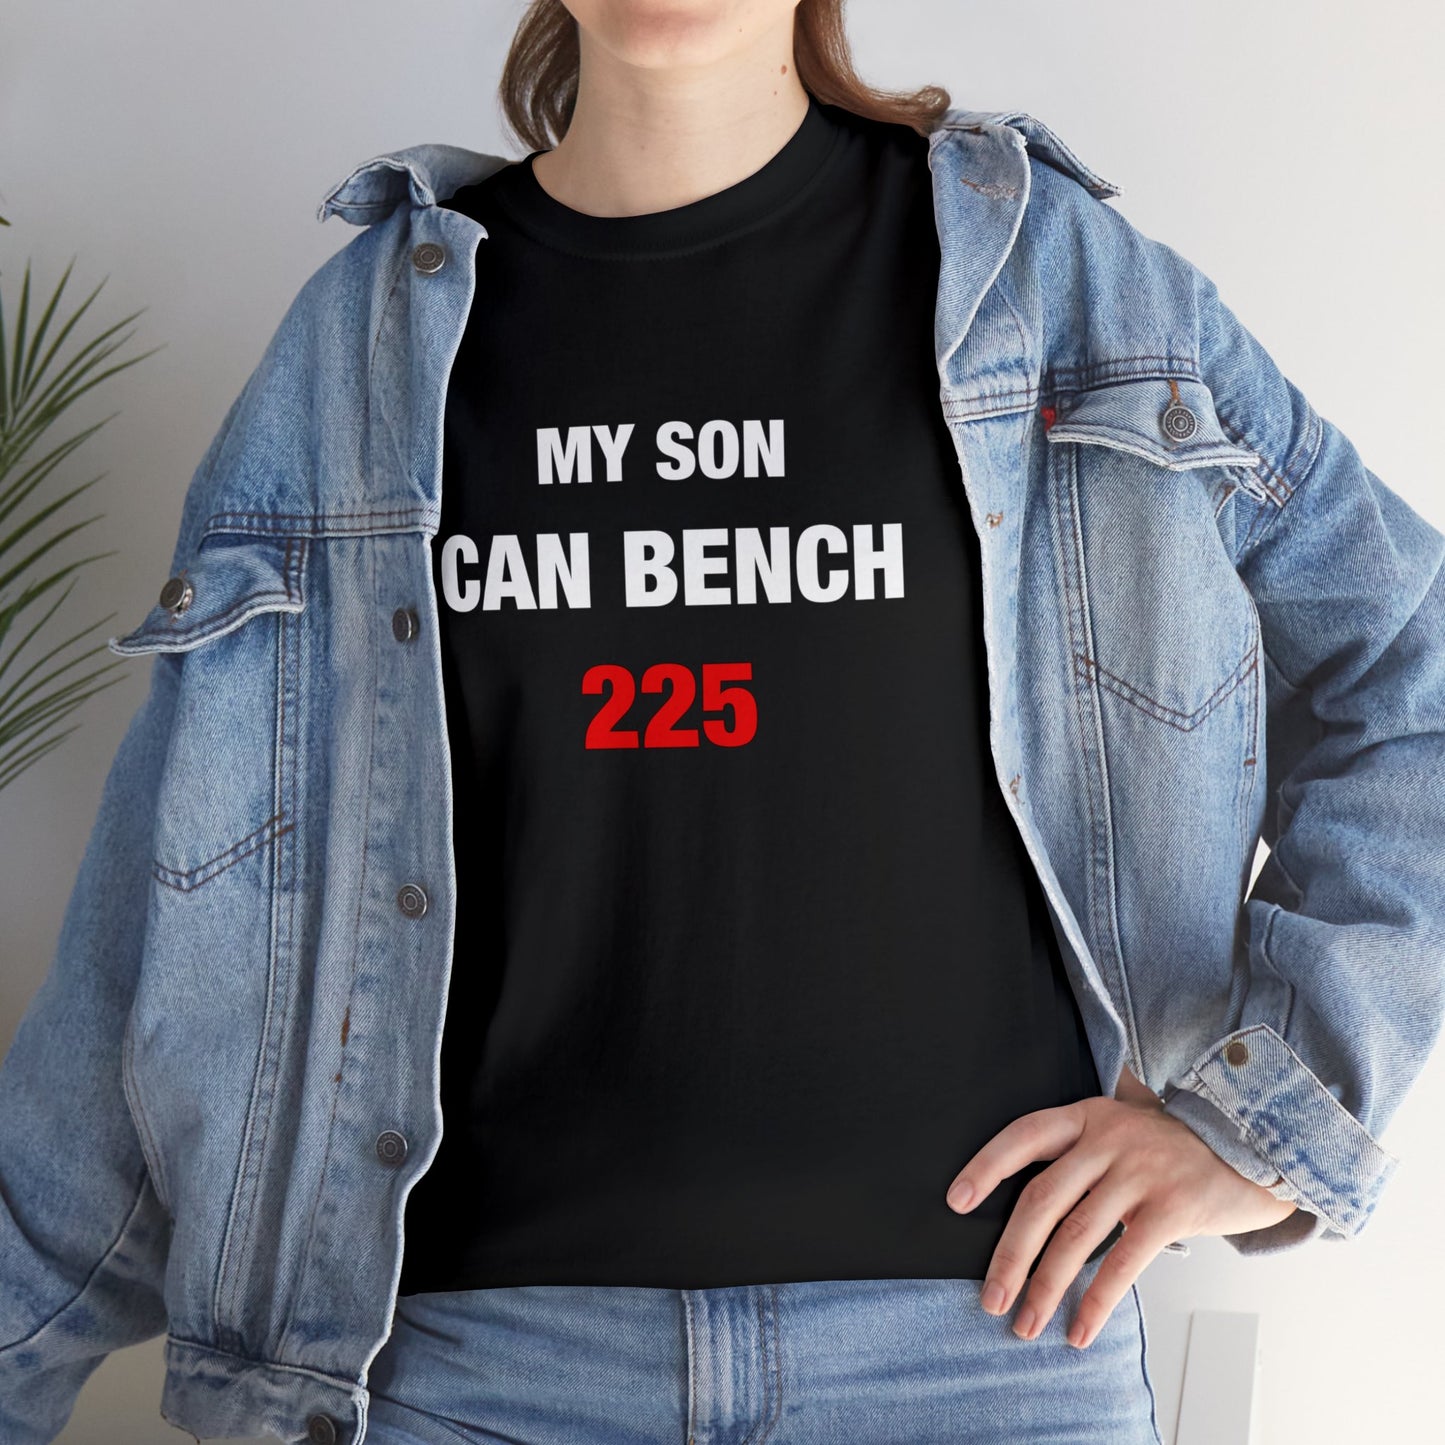 My Son Can Bench 225 Tee